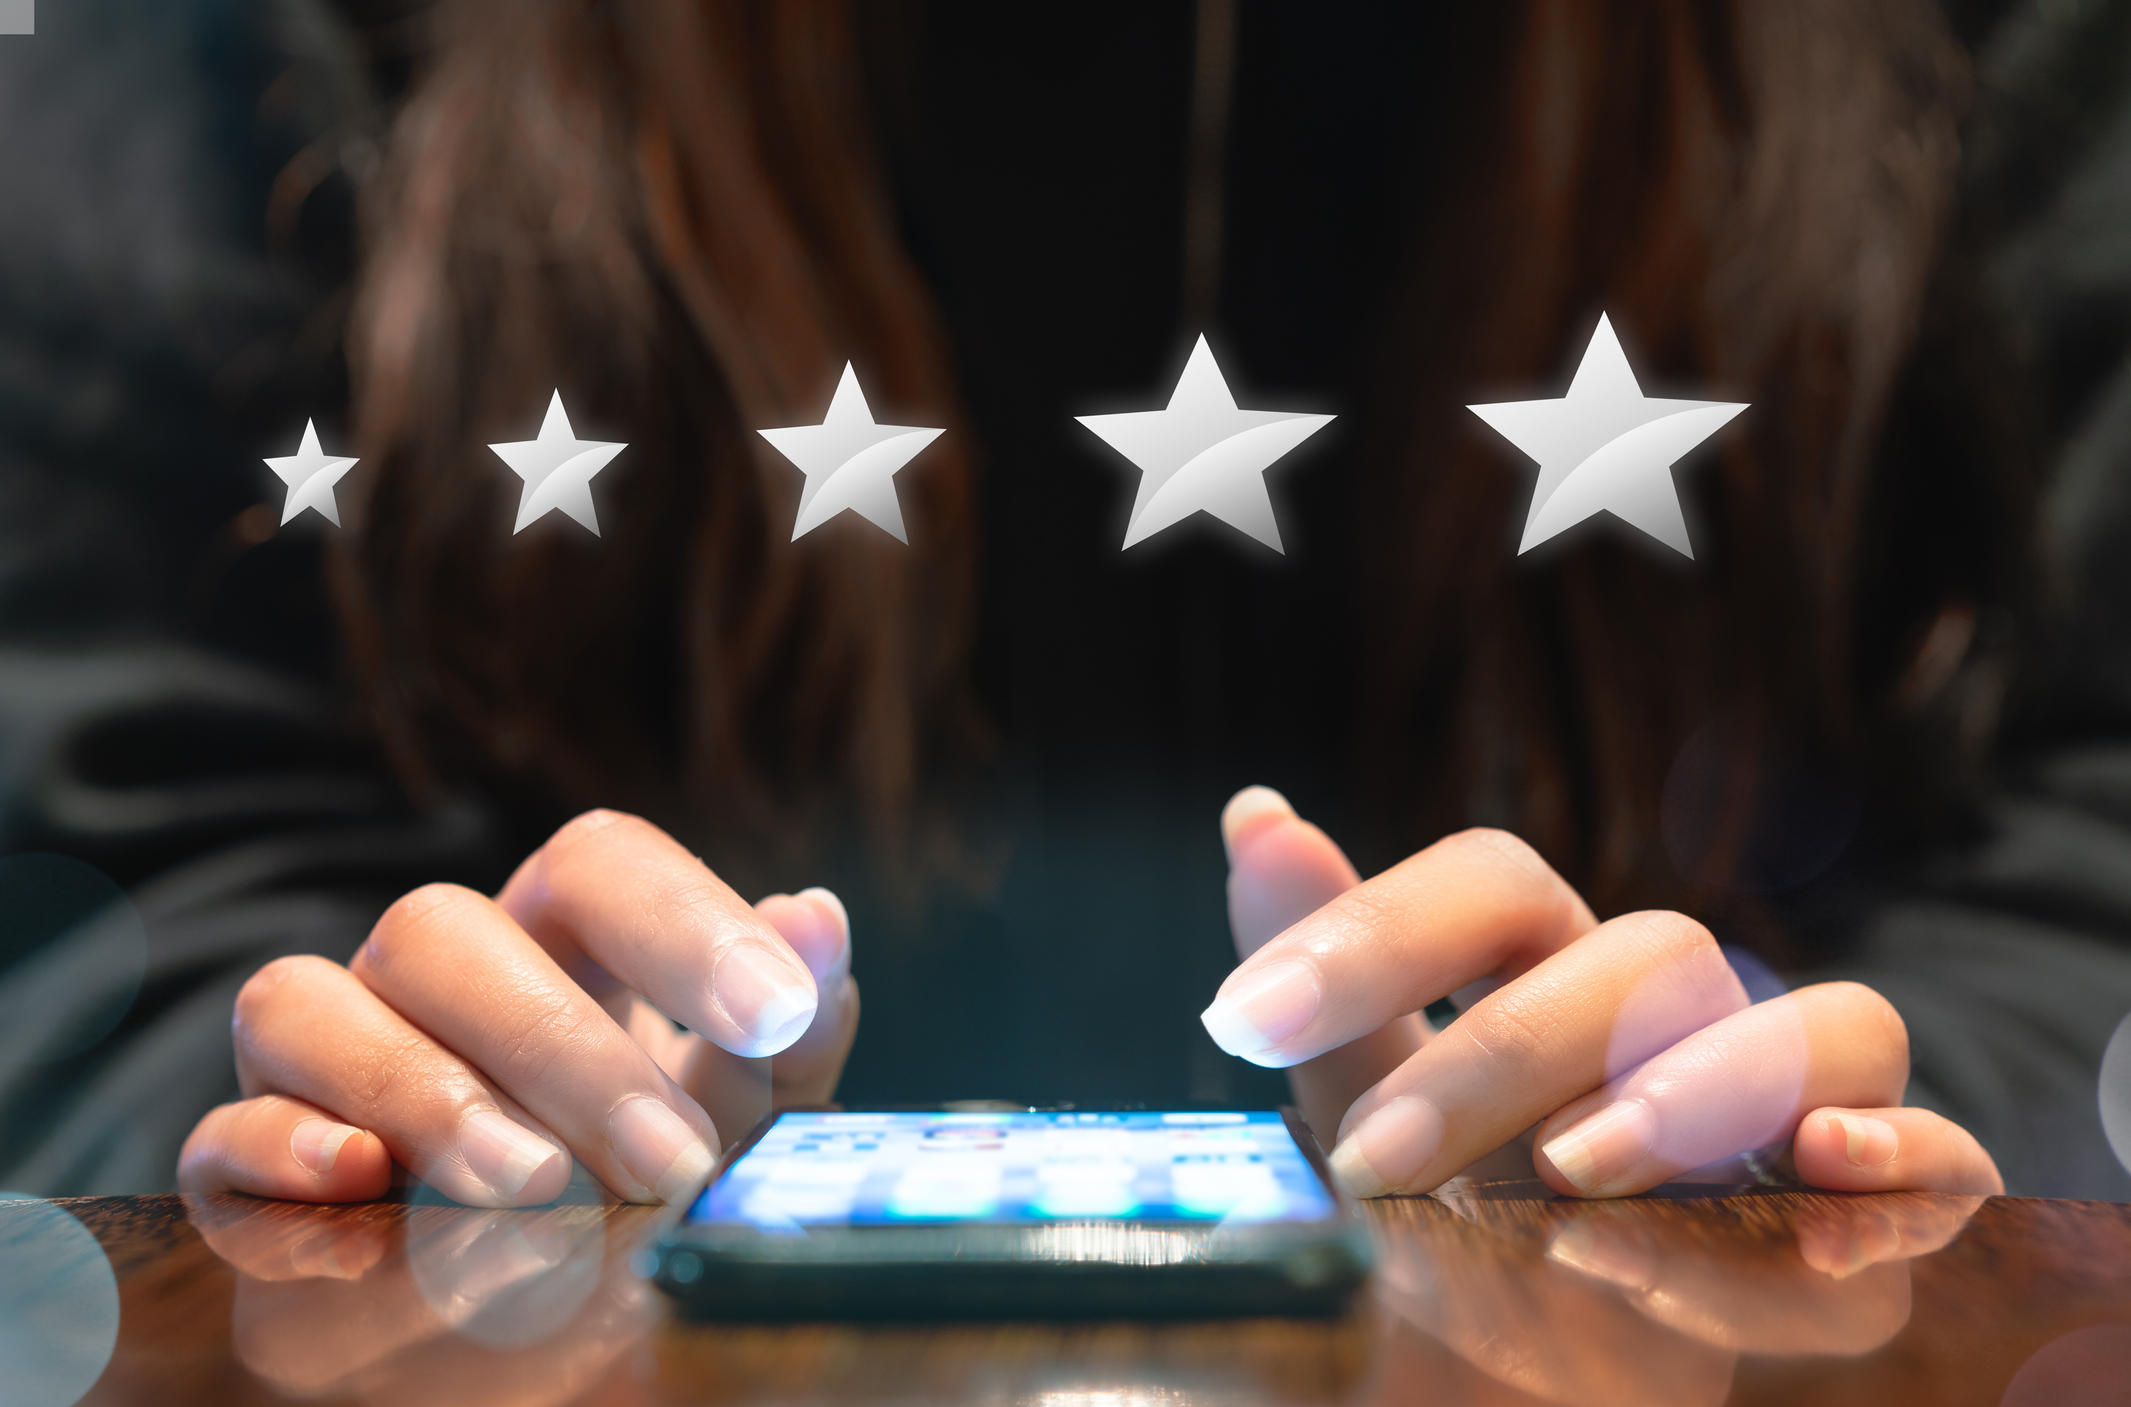 Woman filling out 5 star silver customer service feedback survey by email on smartphone device after hotel guest experience - Company satisfaction rating, retention and quality of service concepts